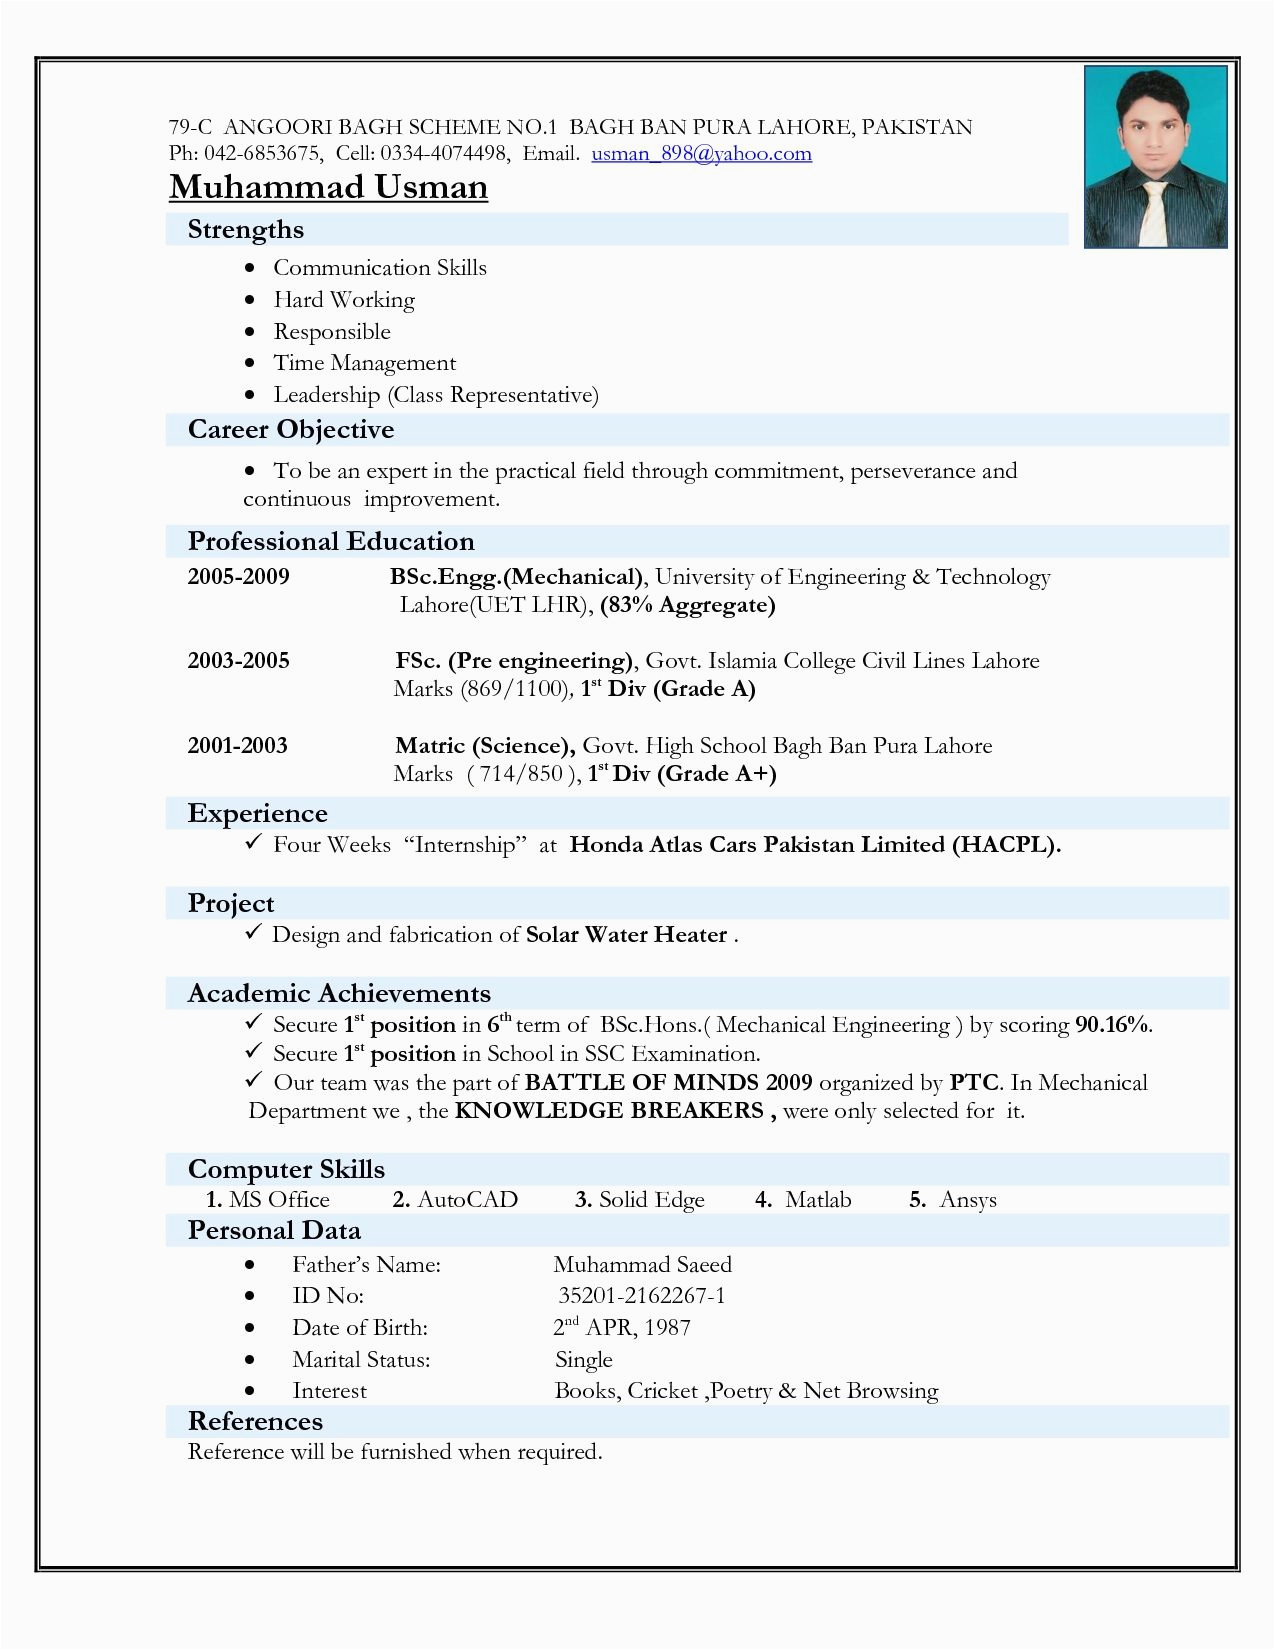 Sample Resume for Fresher Mechanical Engineering Student Cv format for Engineers